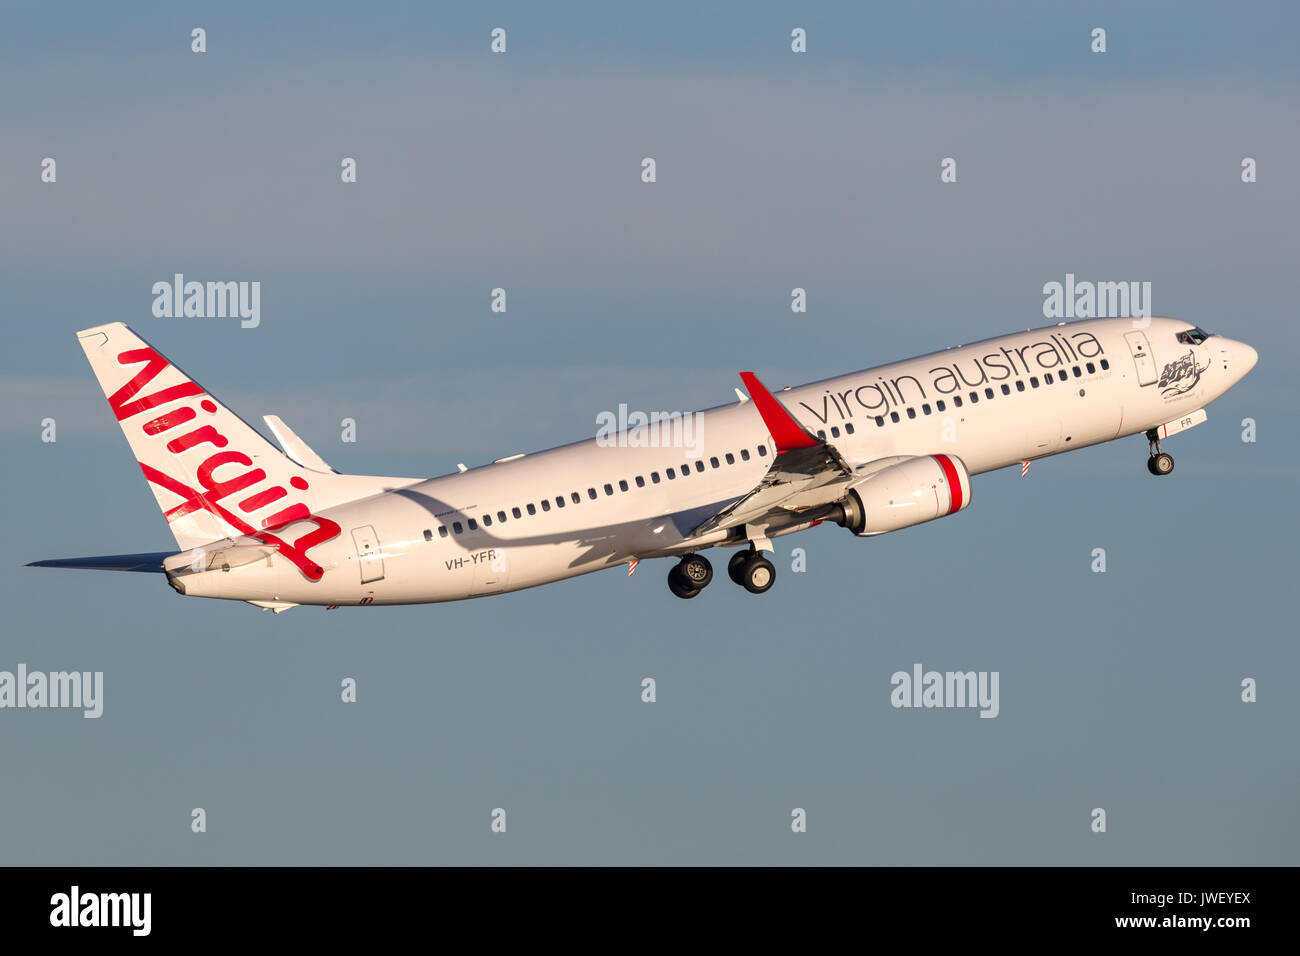 Virgin Australia Airlines Boeing 737-800 aircraft taking off from Sydney Airport. Stock Photo